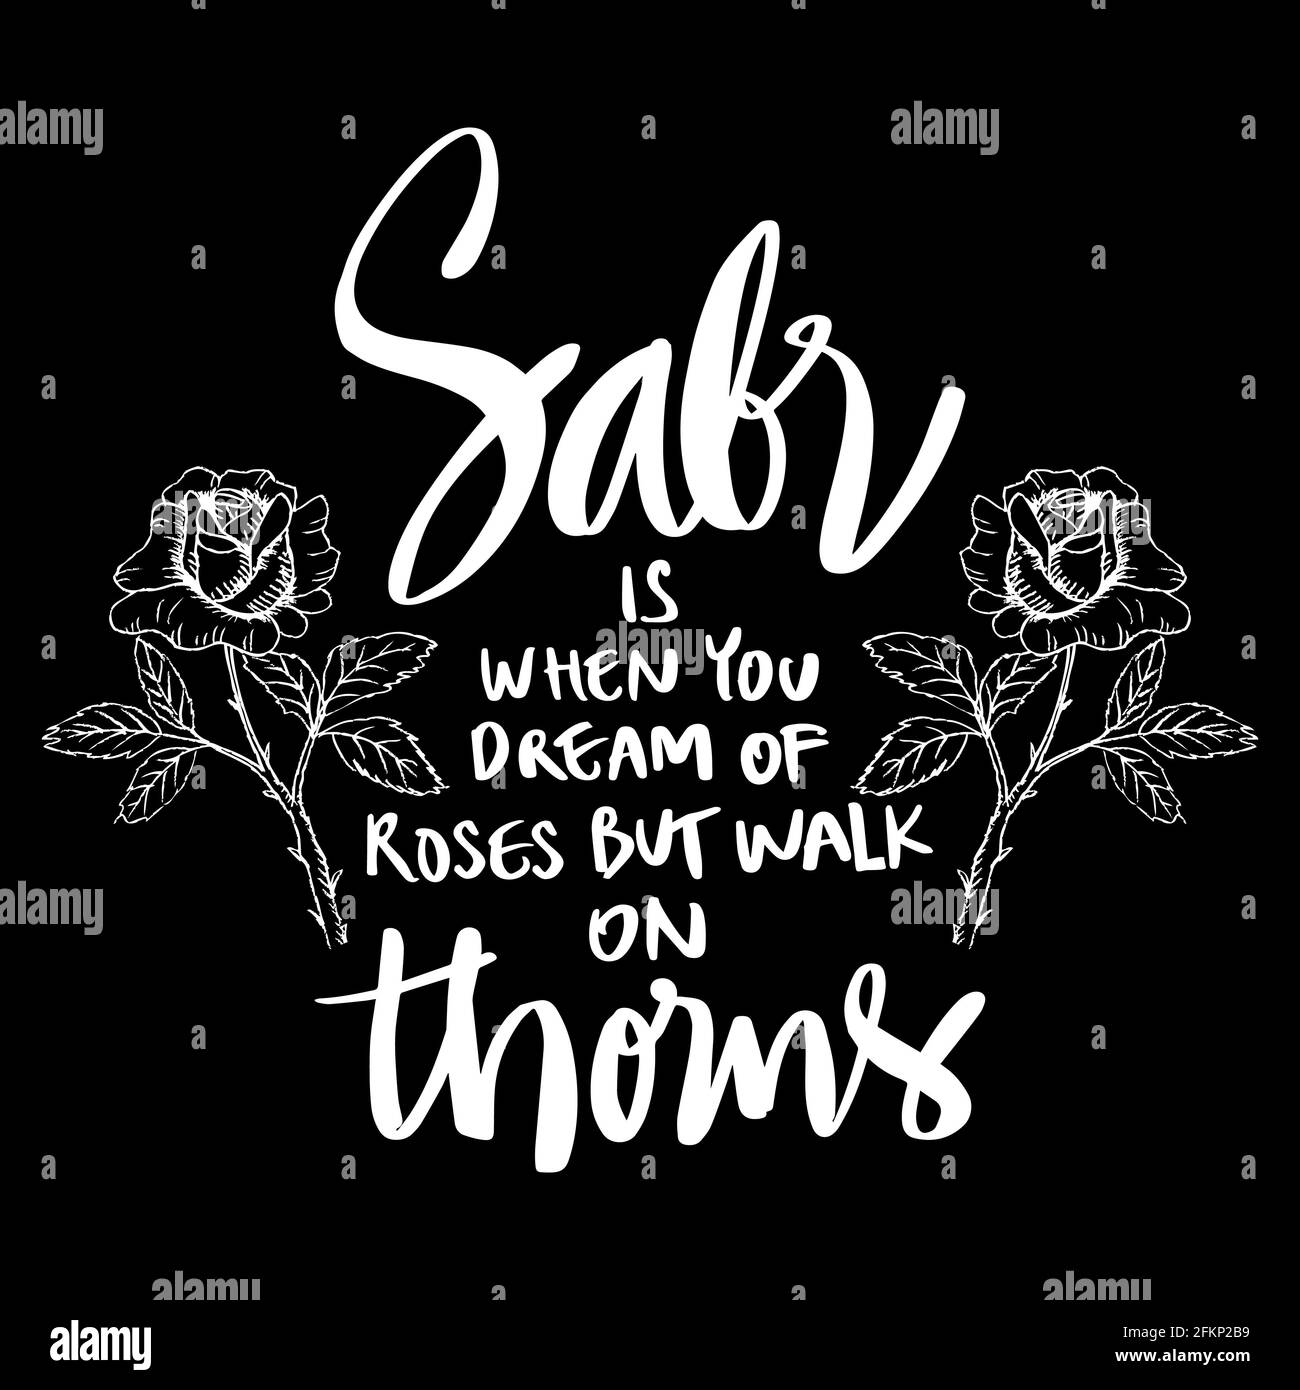 Sabr (patience) is when you dream of roses but walk on thorns ...